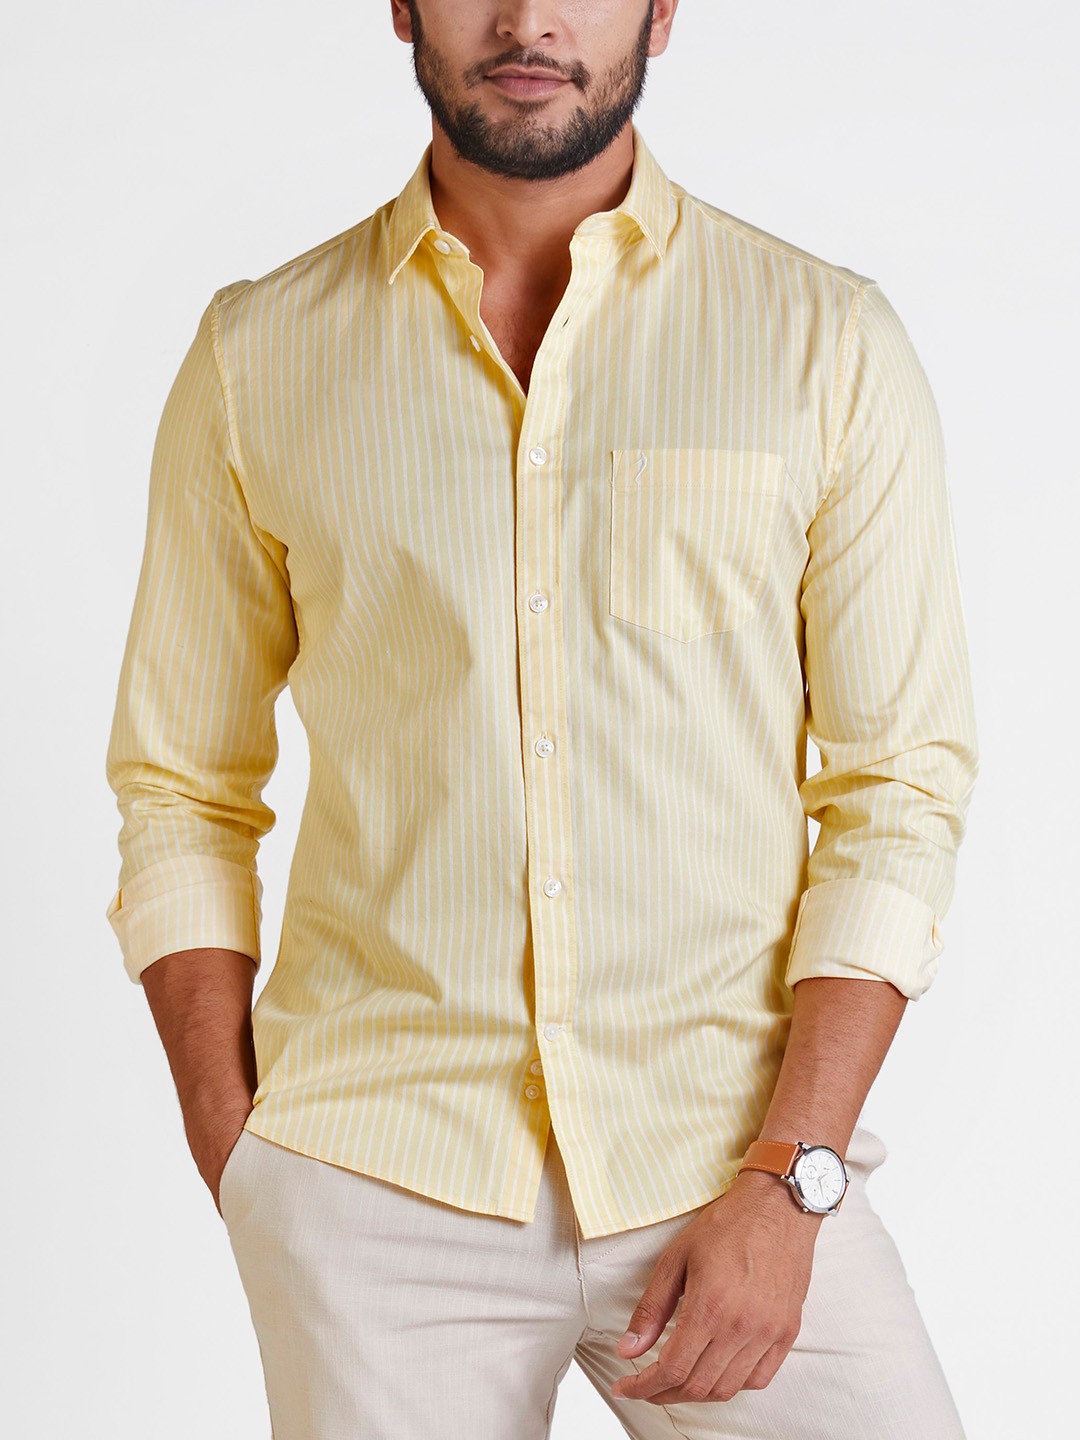 Mens Yellow Stripe Chiseled Fit Casual ...